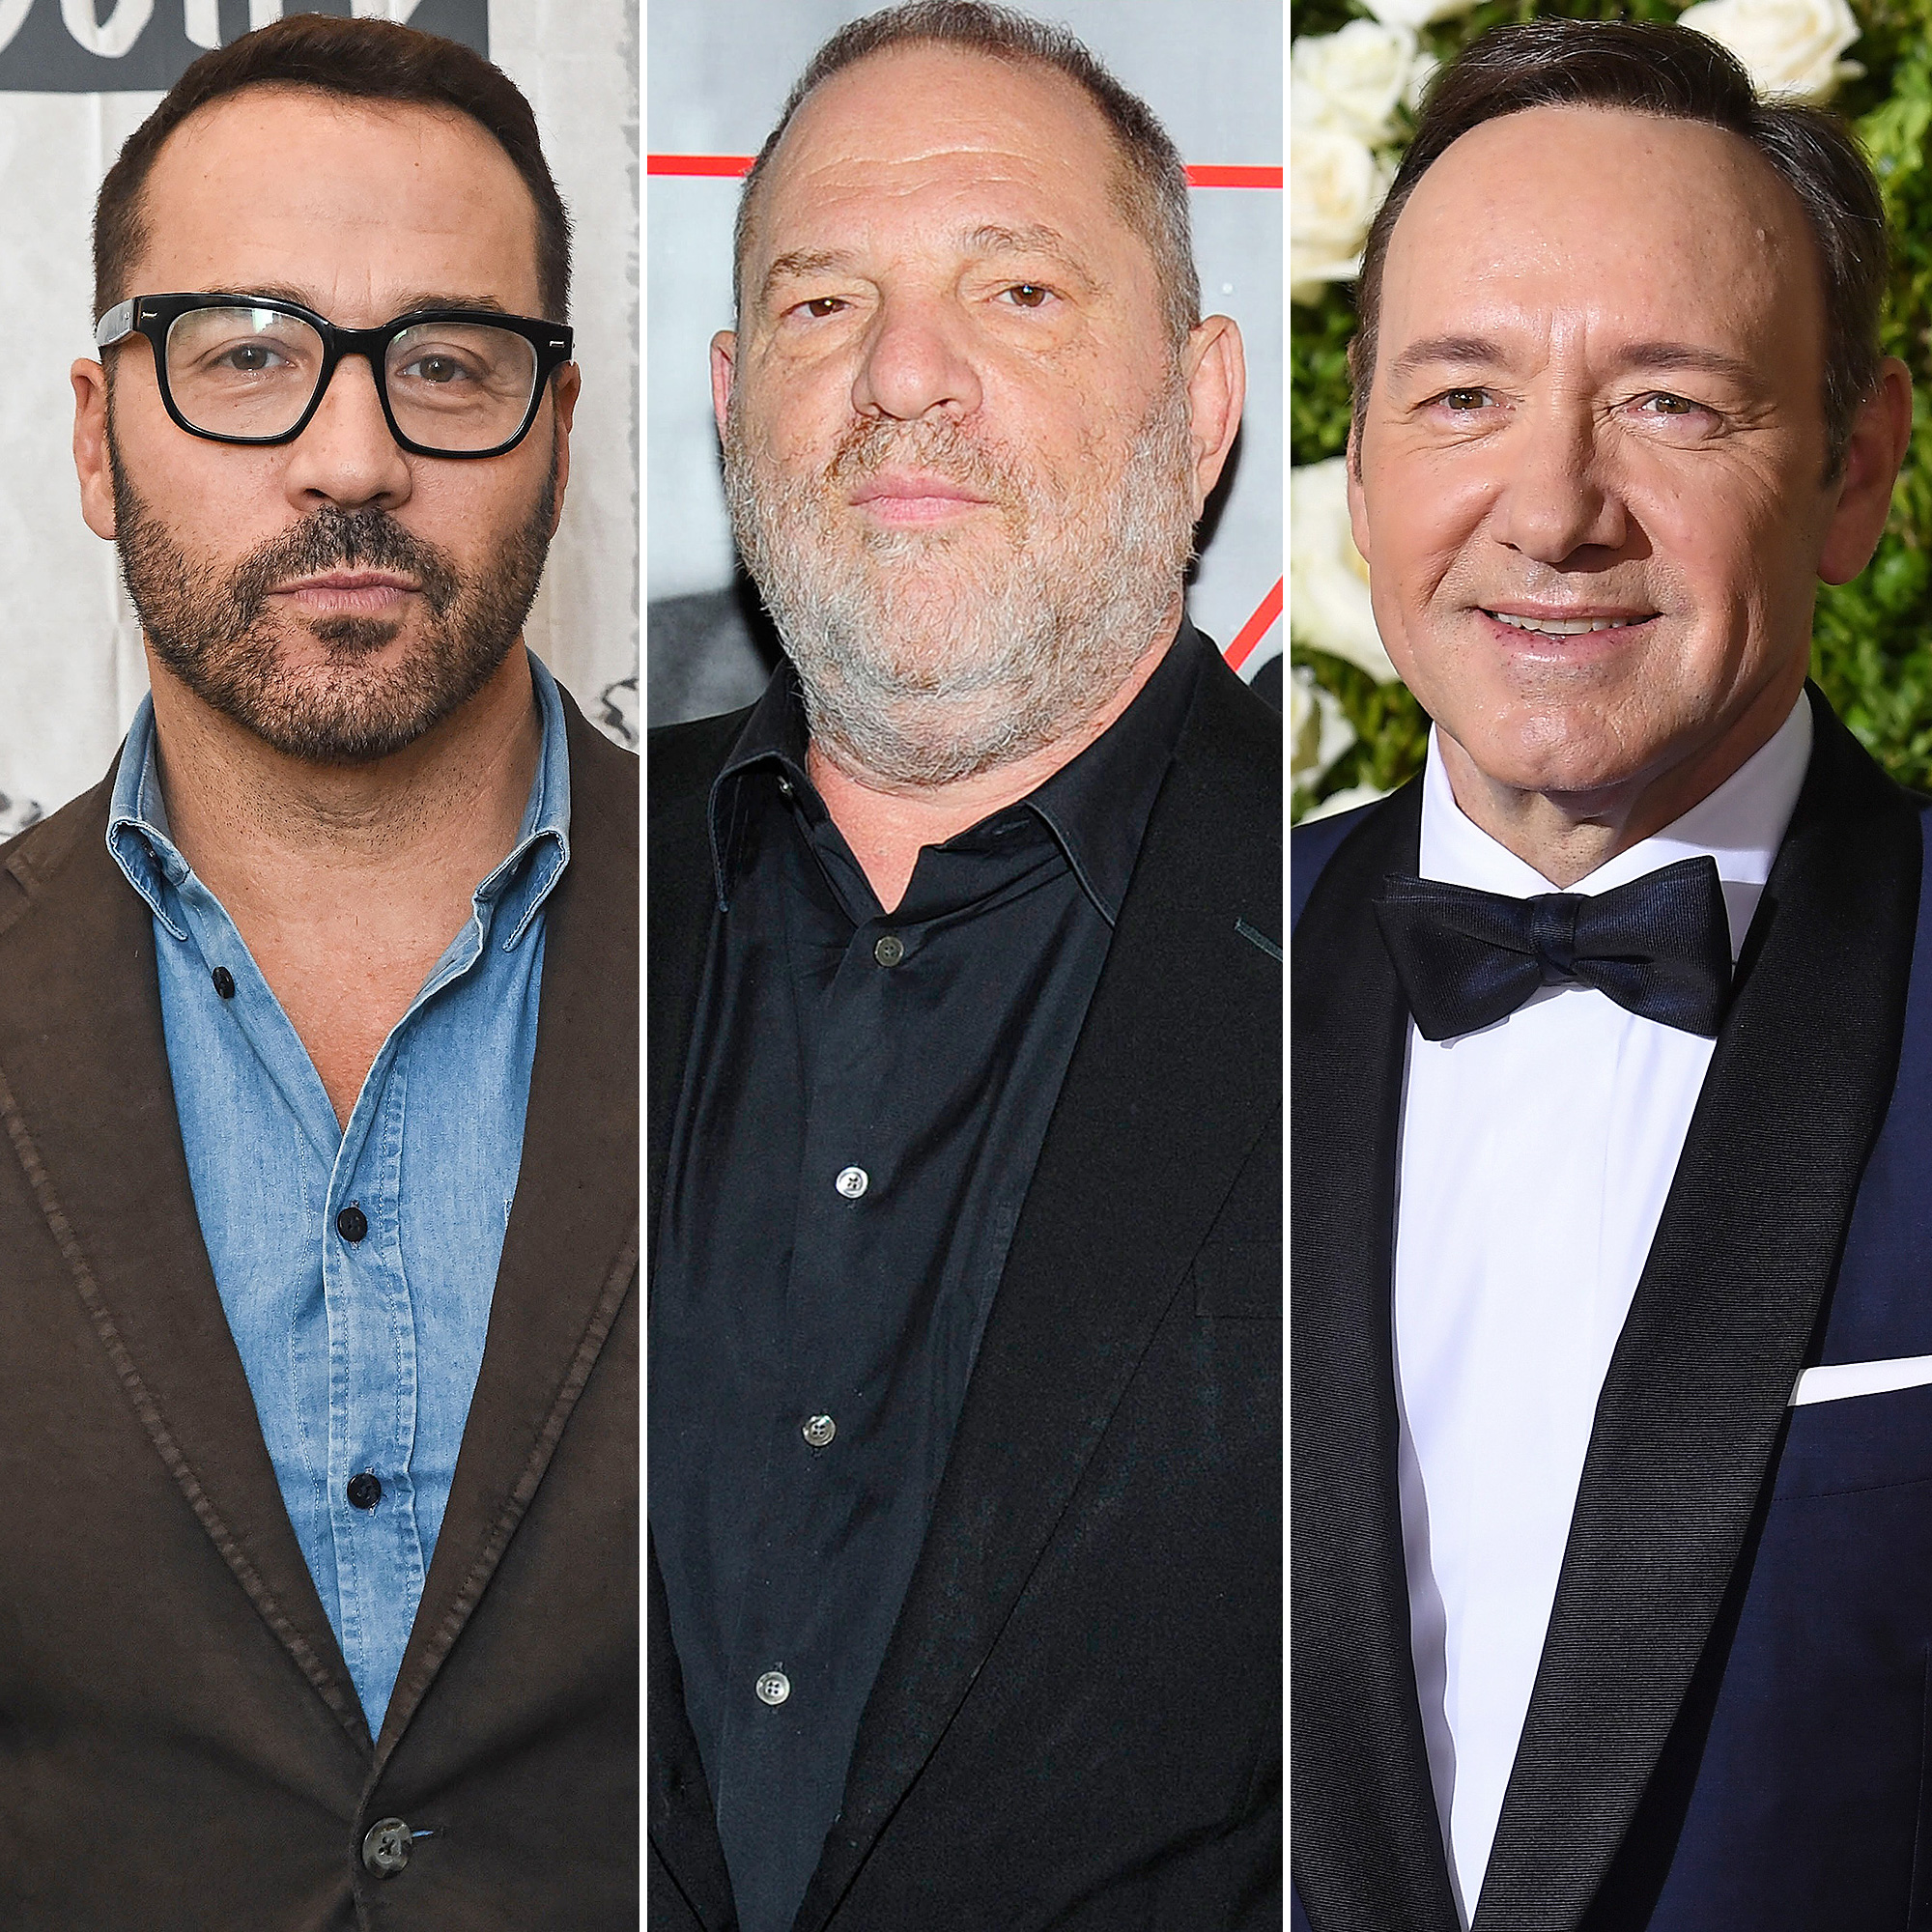 Hollywood Sexual Misconduct Scandals